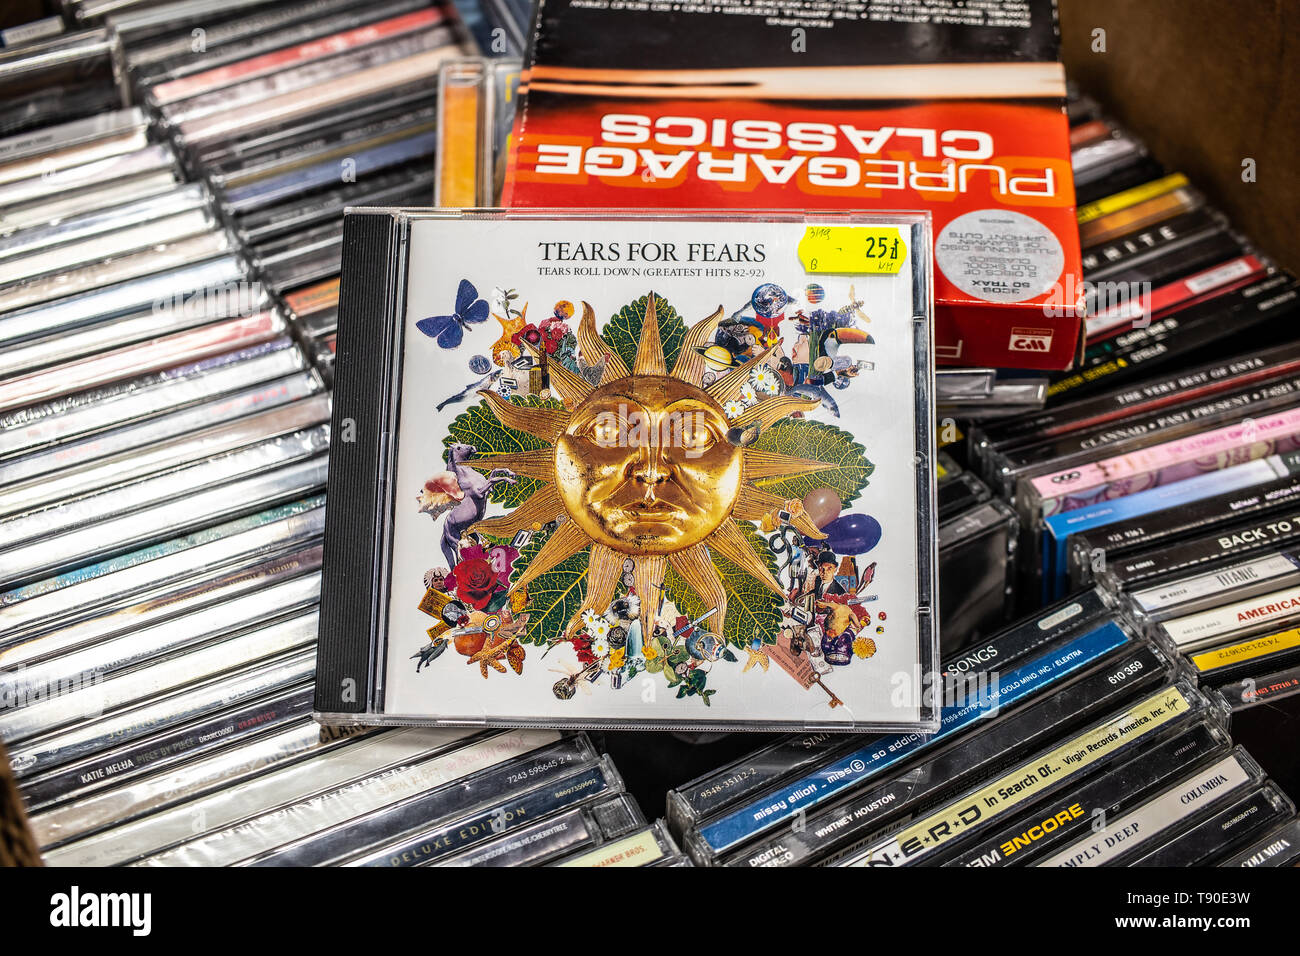 Nadarzyn, Poland, May 11, 2019: Tears for Fears CD album Tears Roll Down (Greatest  Hits 82-92) on display for sale, famous English pop rock band Stock Photo -  Alamy